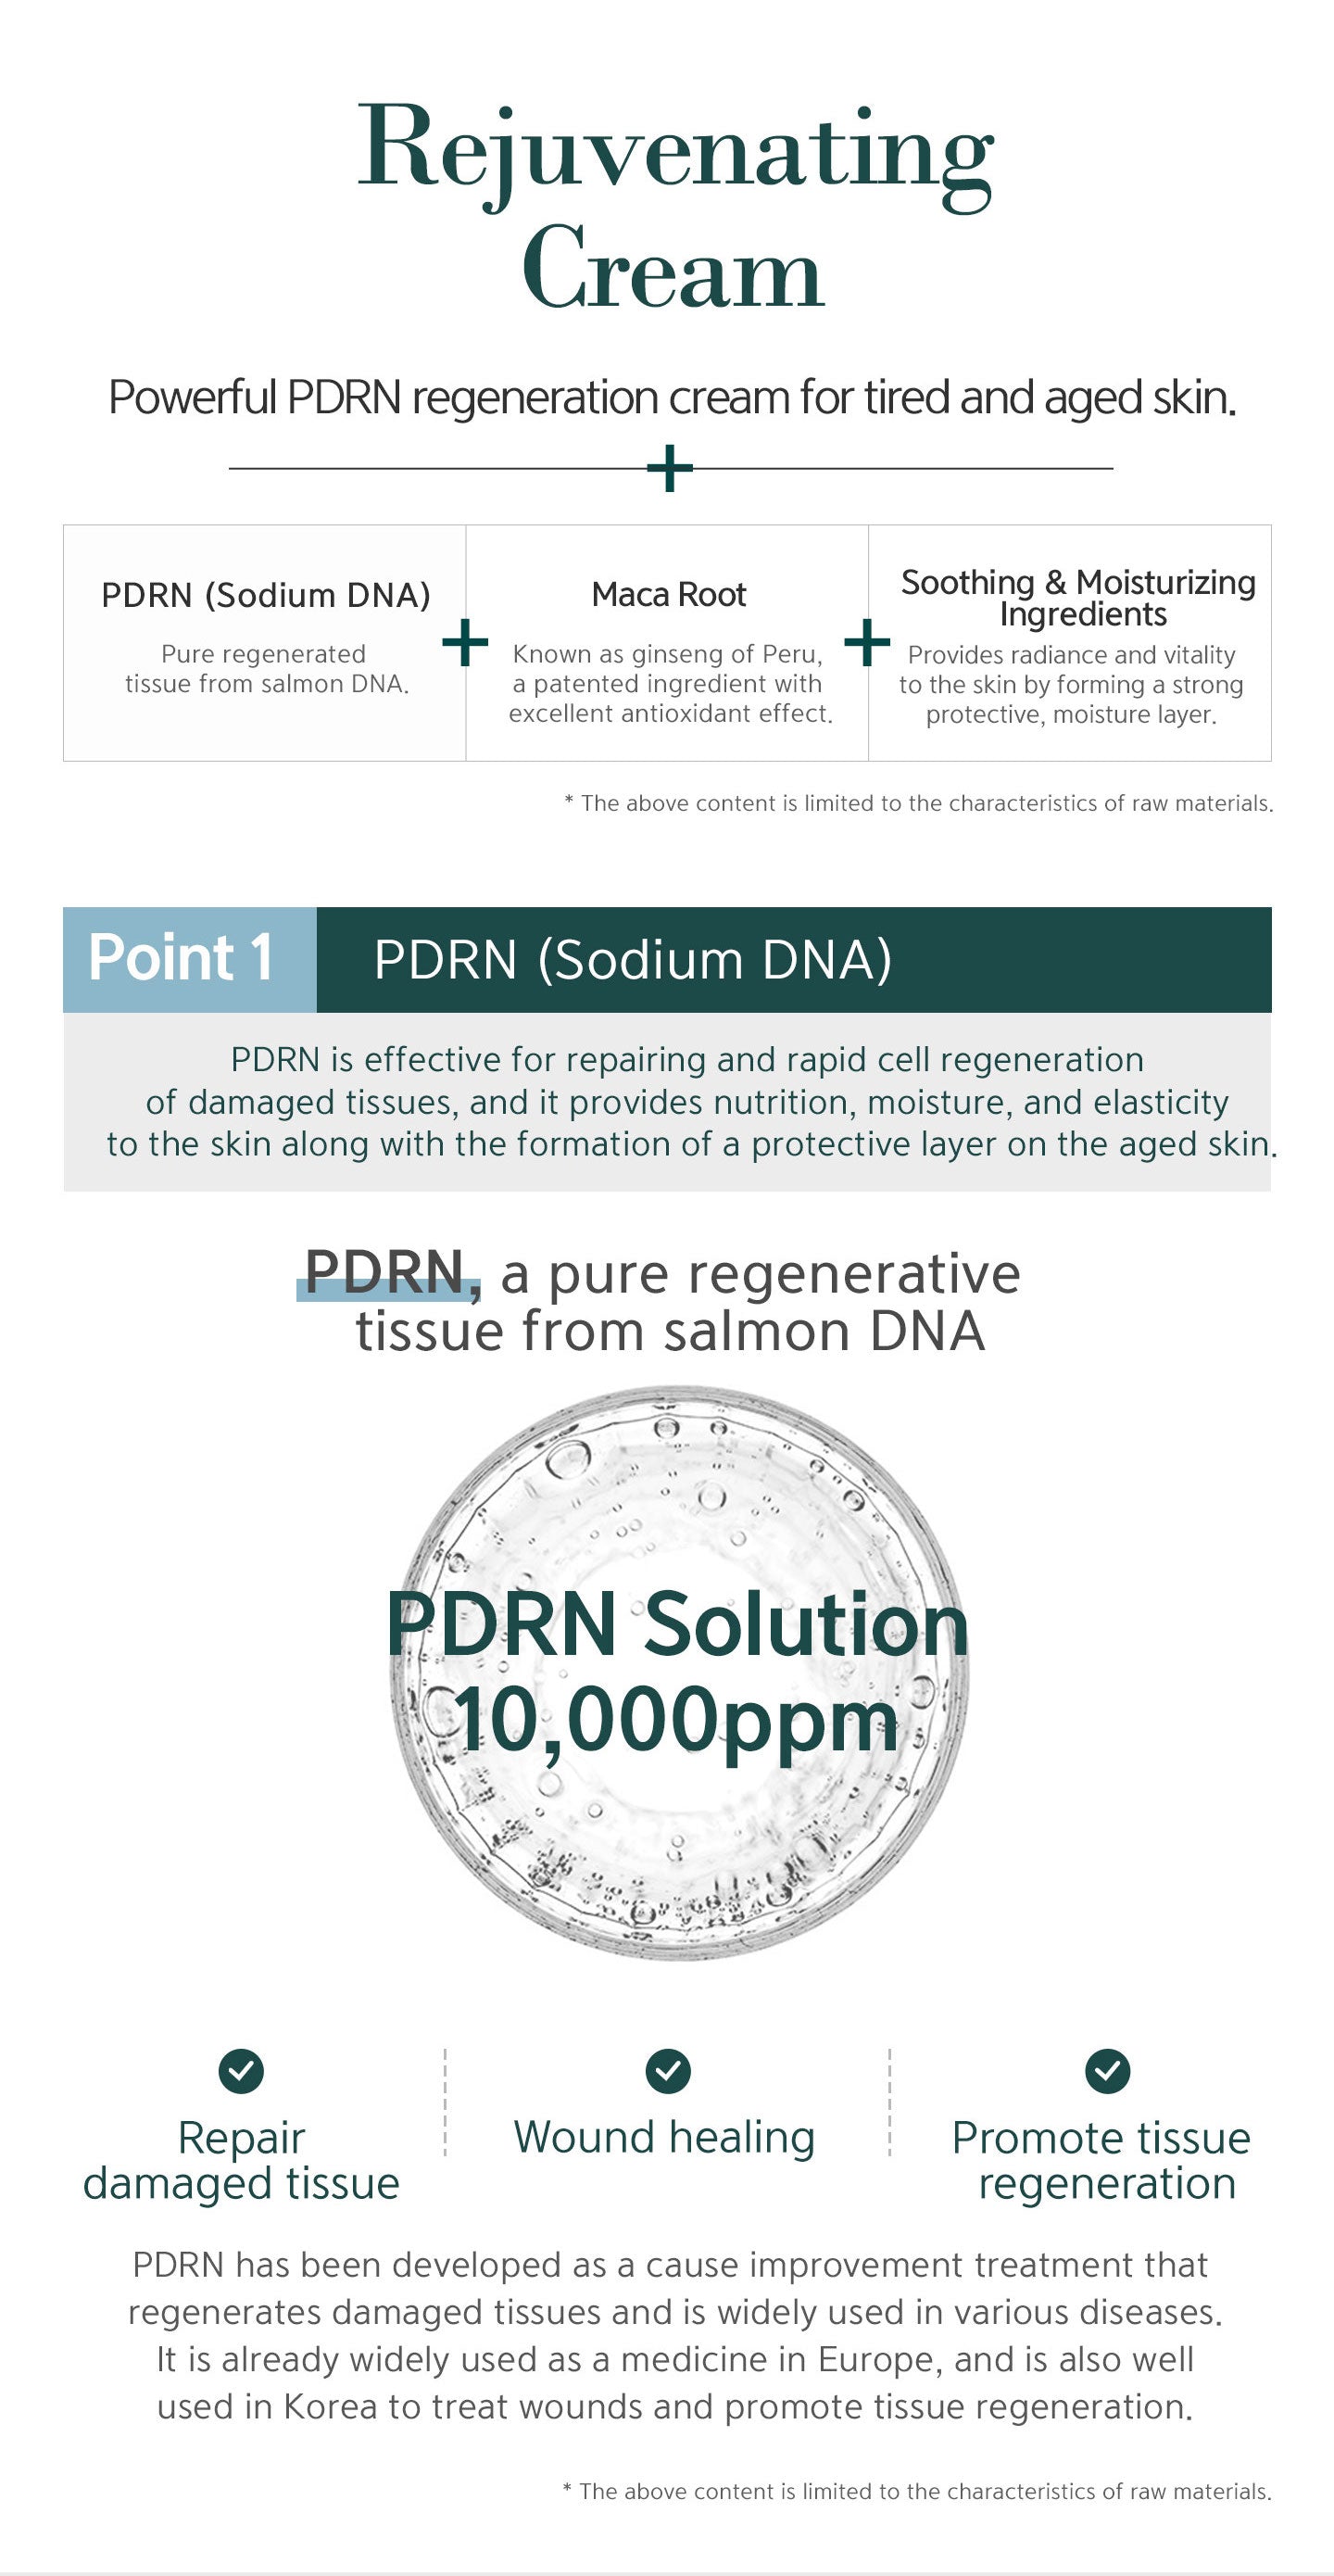 10000 ppm PDRN solution. PDRN is effective for repairing and rapid cell regeneration of damaged tissues, and it provides nutrition, moisture, and elasticity to the skin along with the formation of a protective layer on the aged skin. 